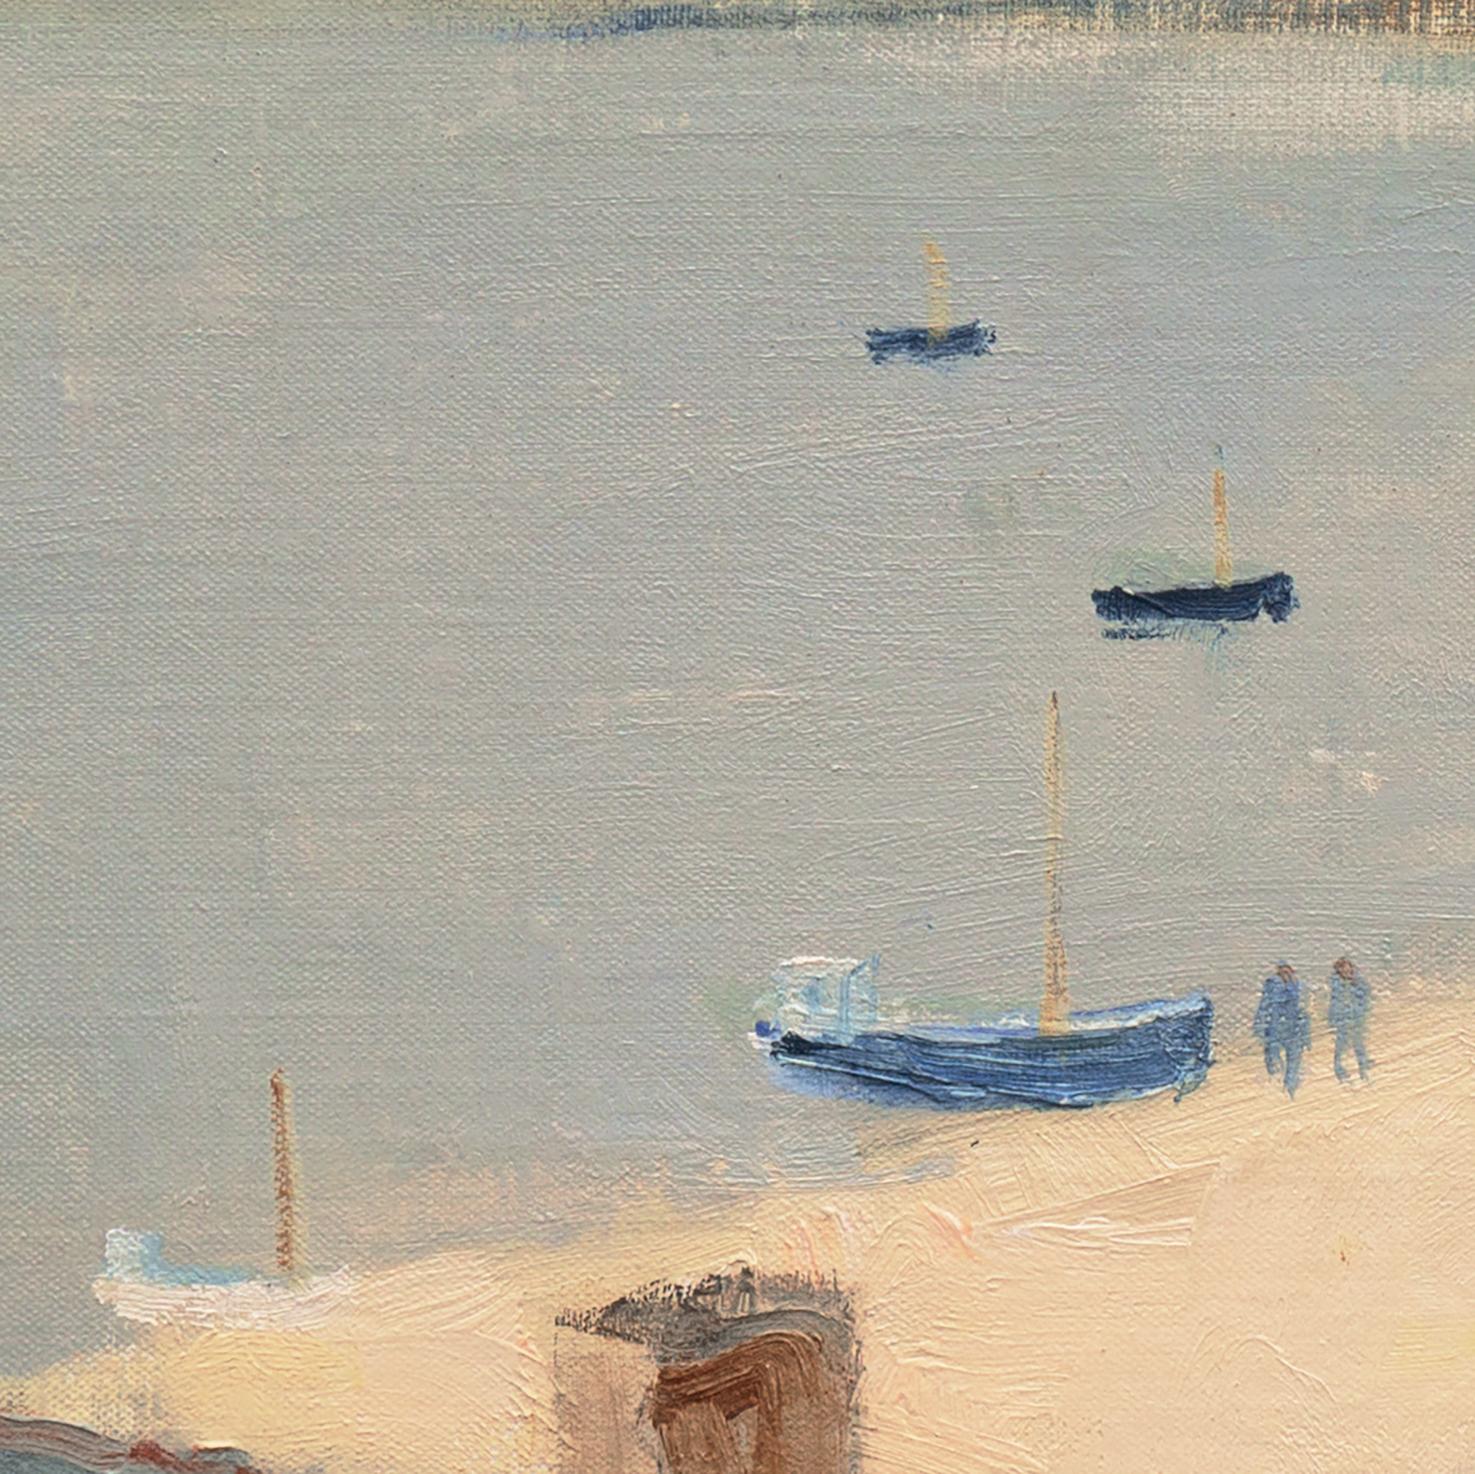 Signed lower left, 'Mogens Hertz' (Danish, 1909-1999) and painted circa 1935.

This notable Impressionist first studied with the classically-trained Academician, Laurits Ring and, subsequently, with the pioneering Danish Impressionist, Rostrup